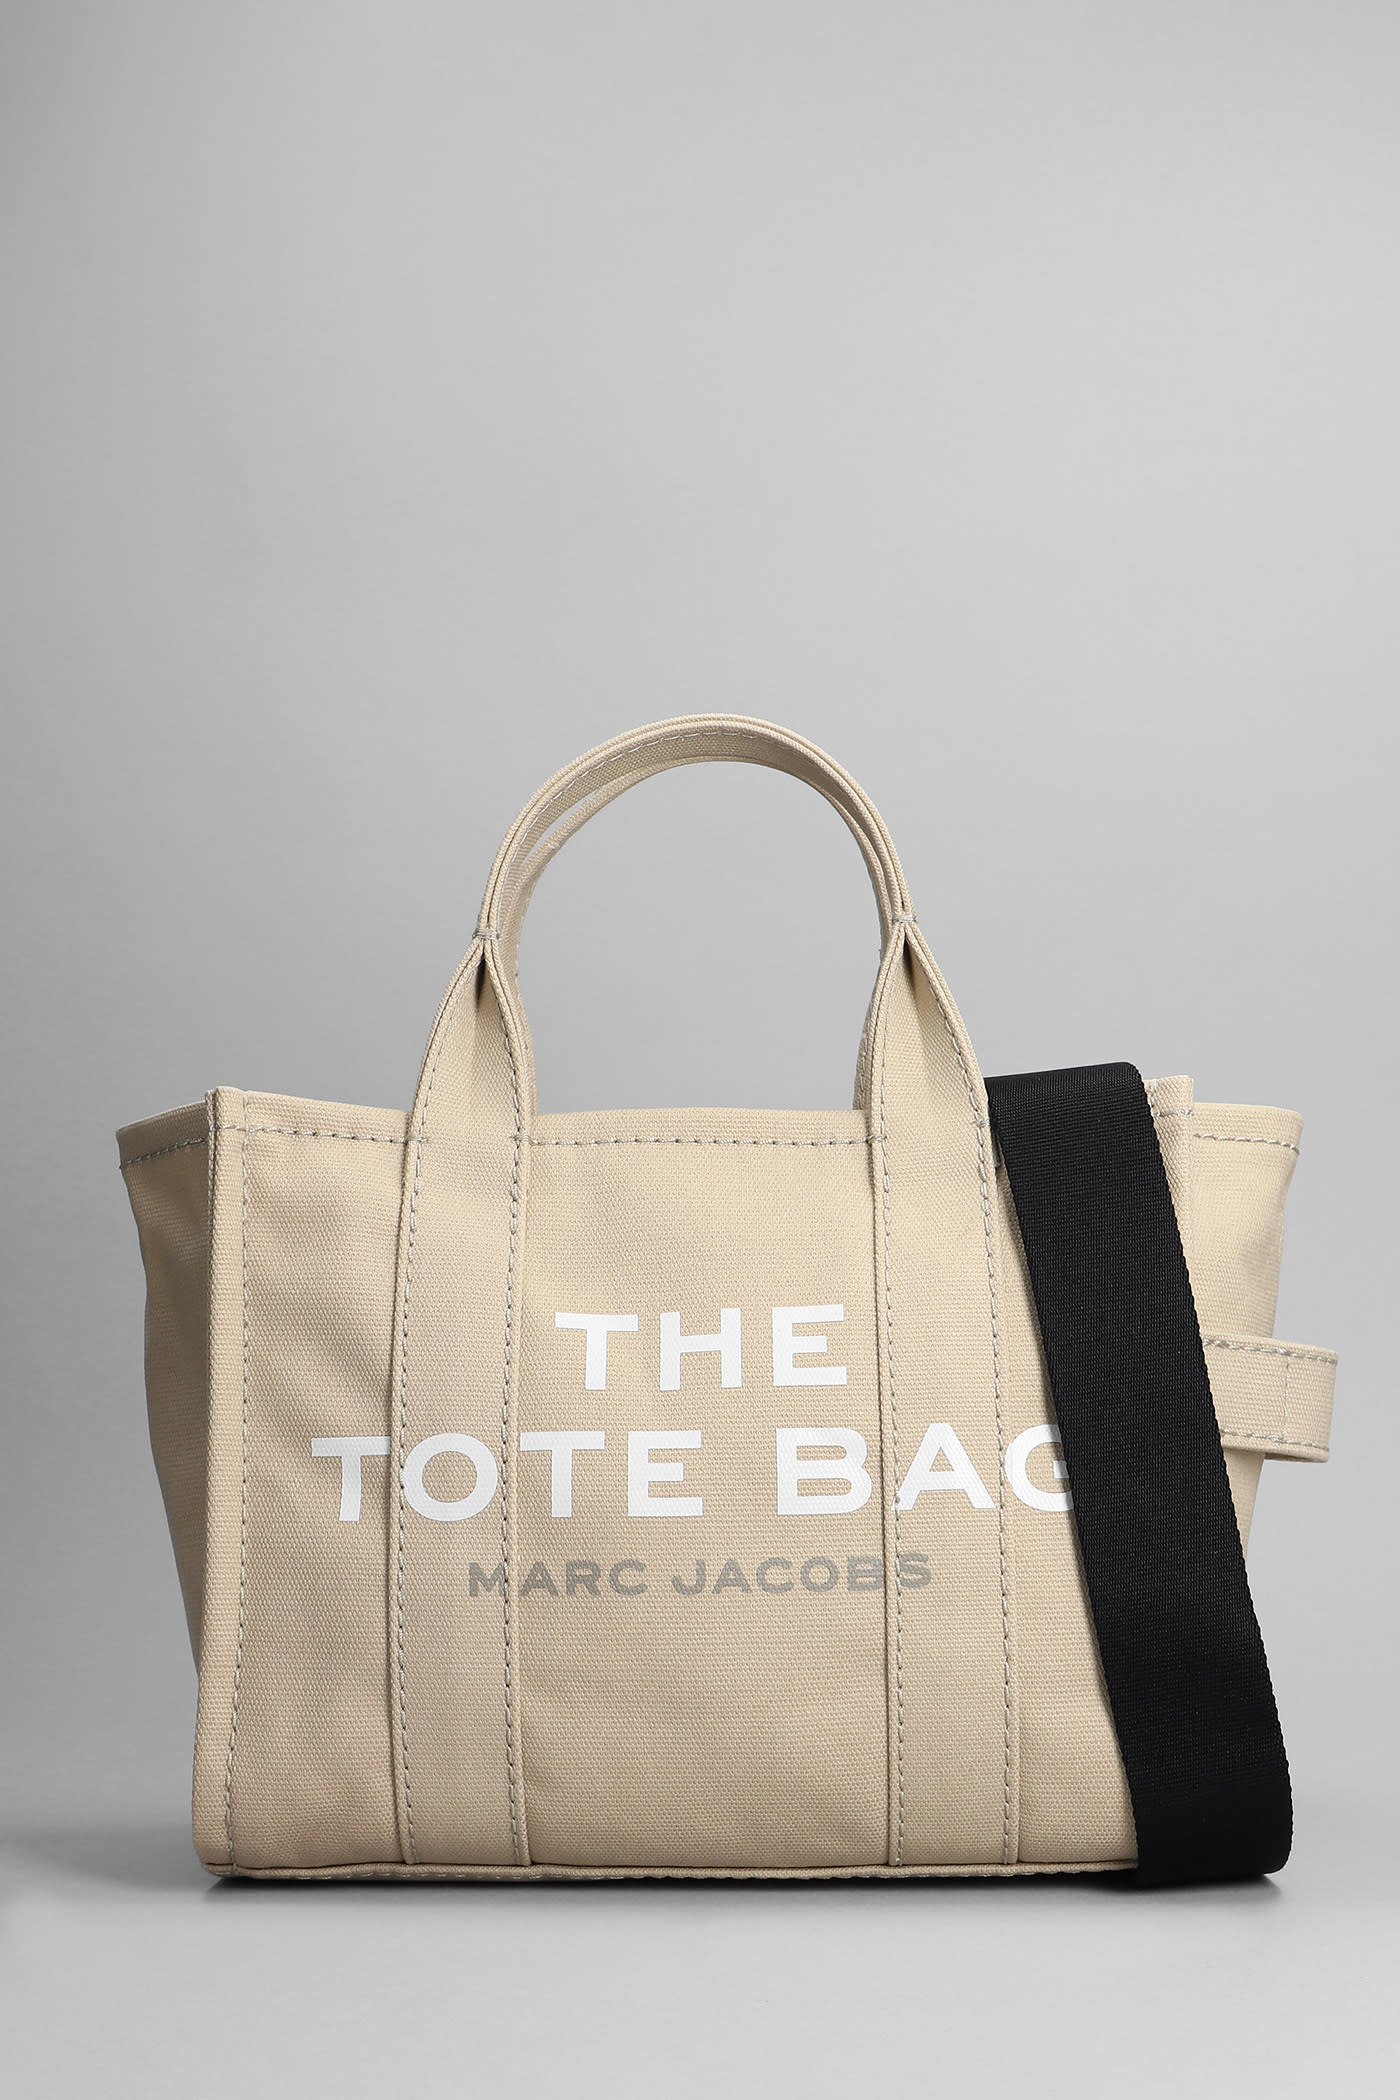 MARC JACOBS HAND BAG IN BEIGE CANVAS